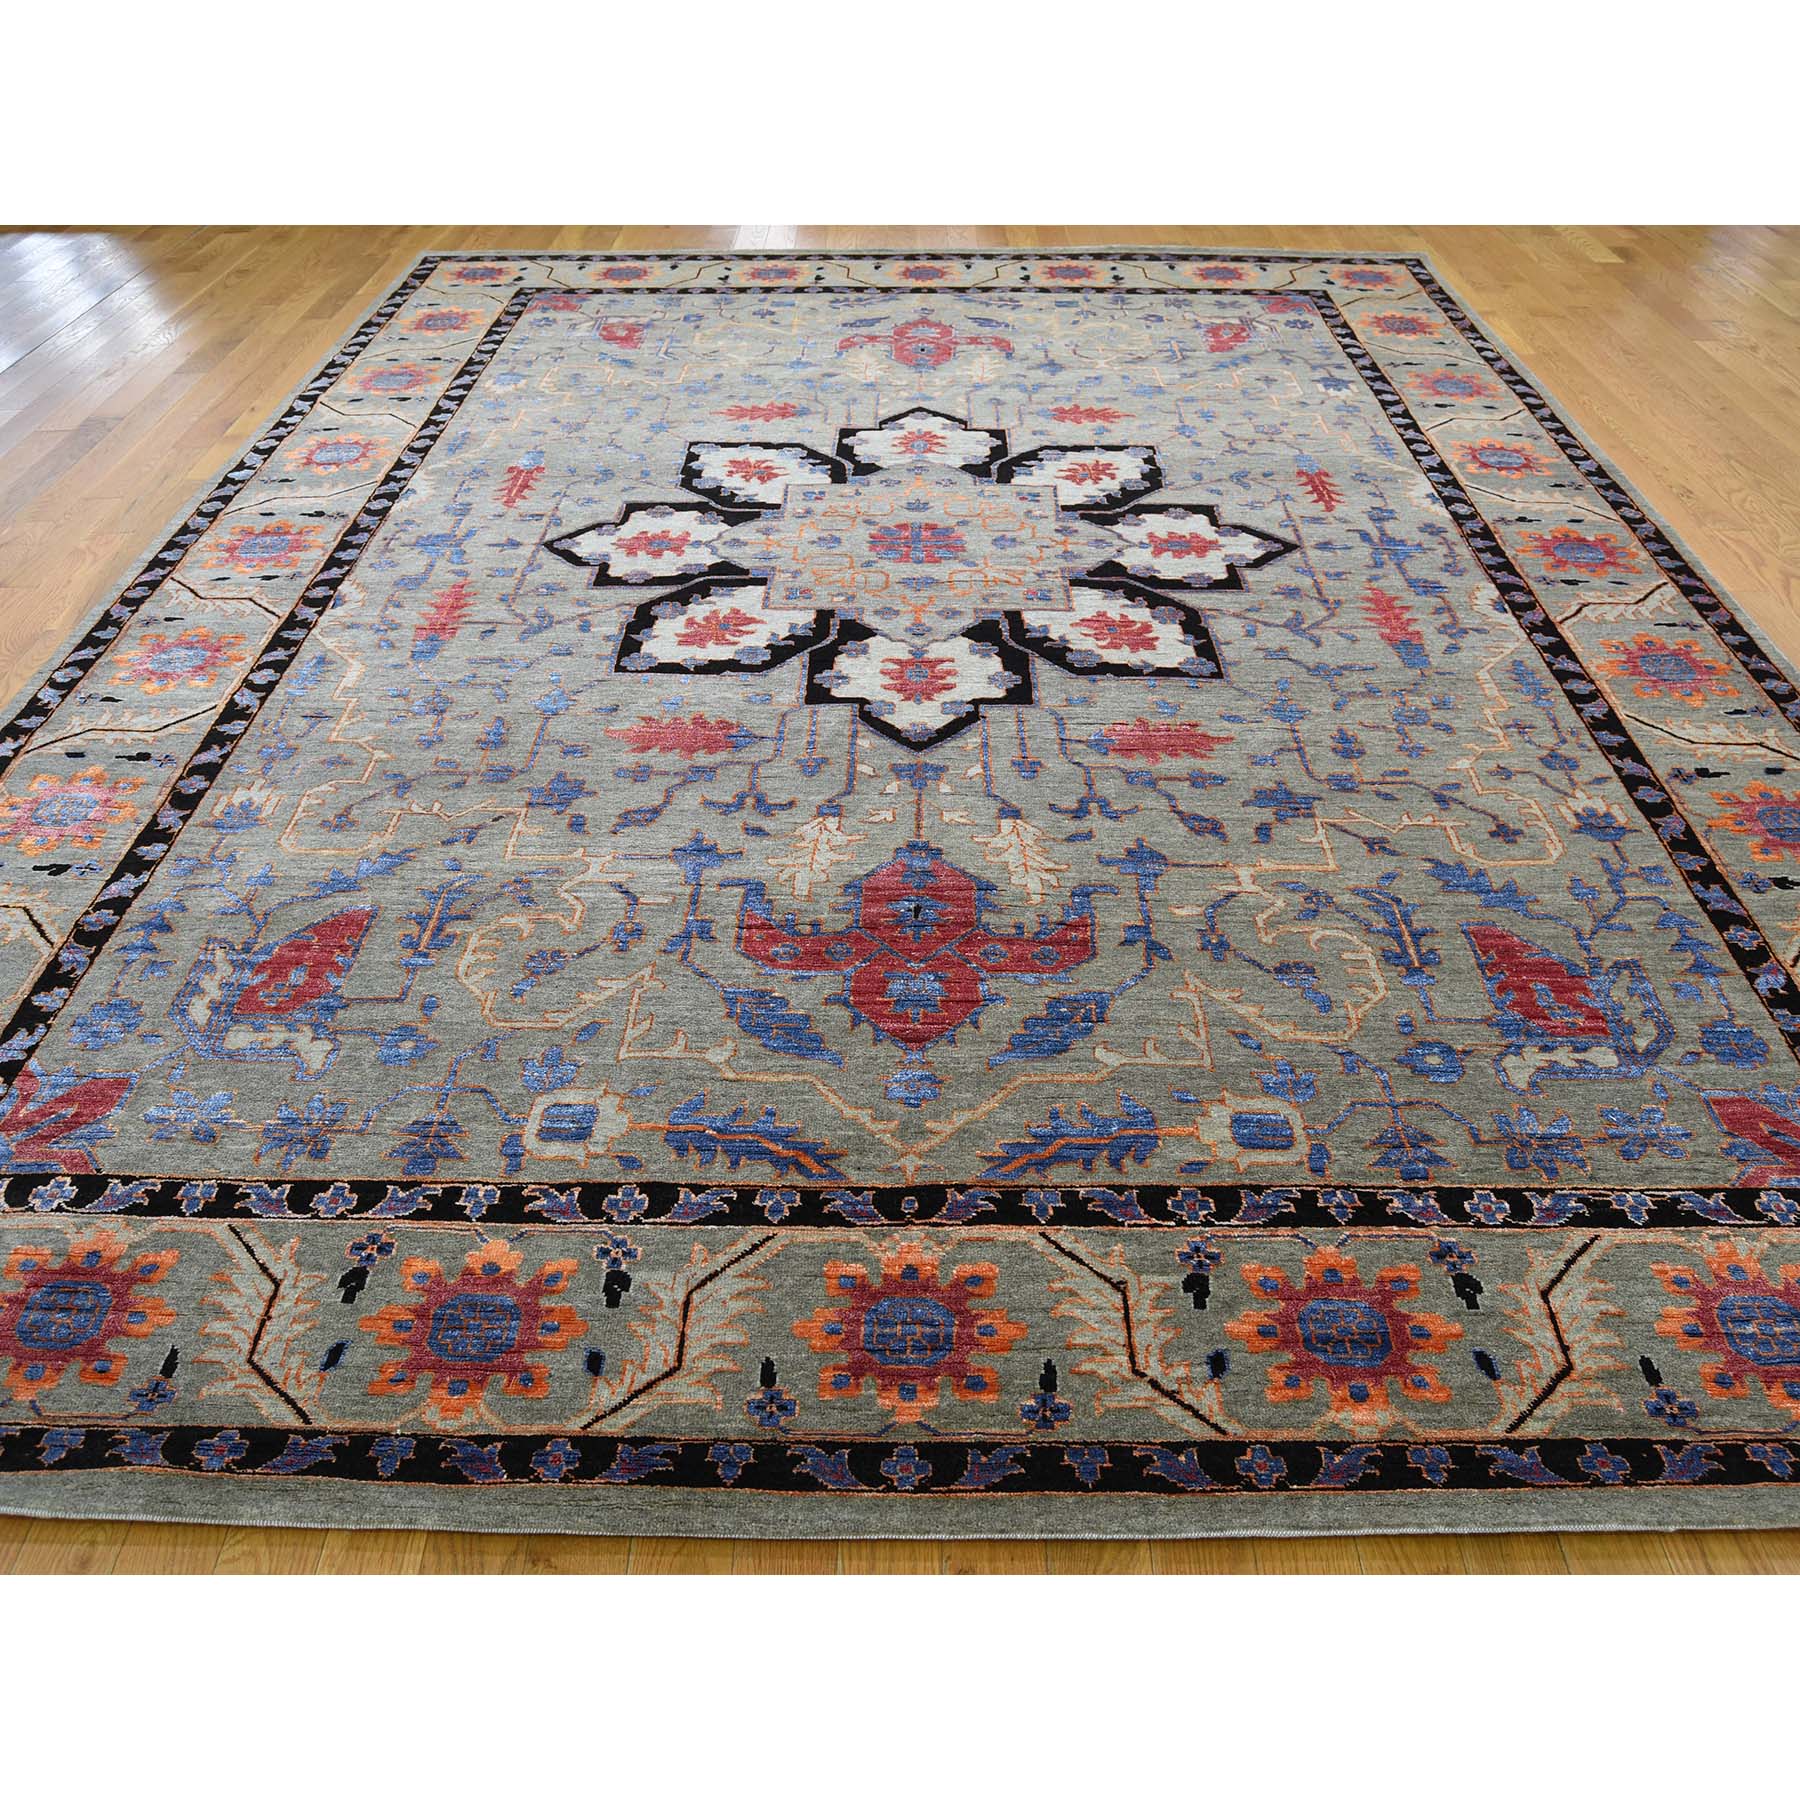 8-10 x12-1  Hand-Knotted Heriz Design Wool And Silk Oriental Rug 